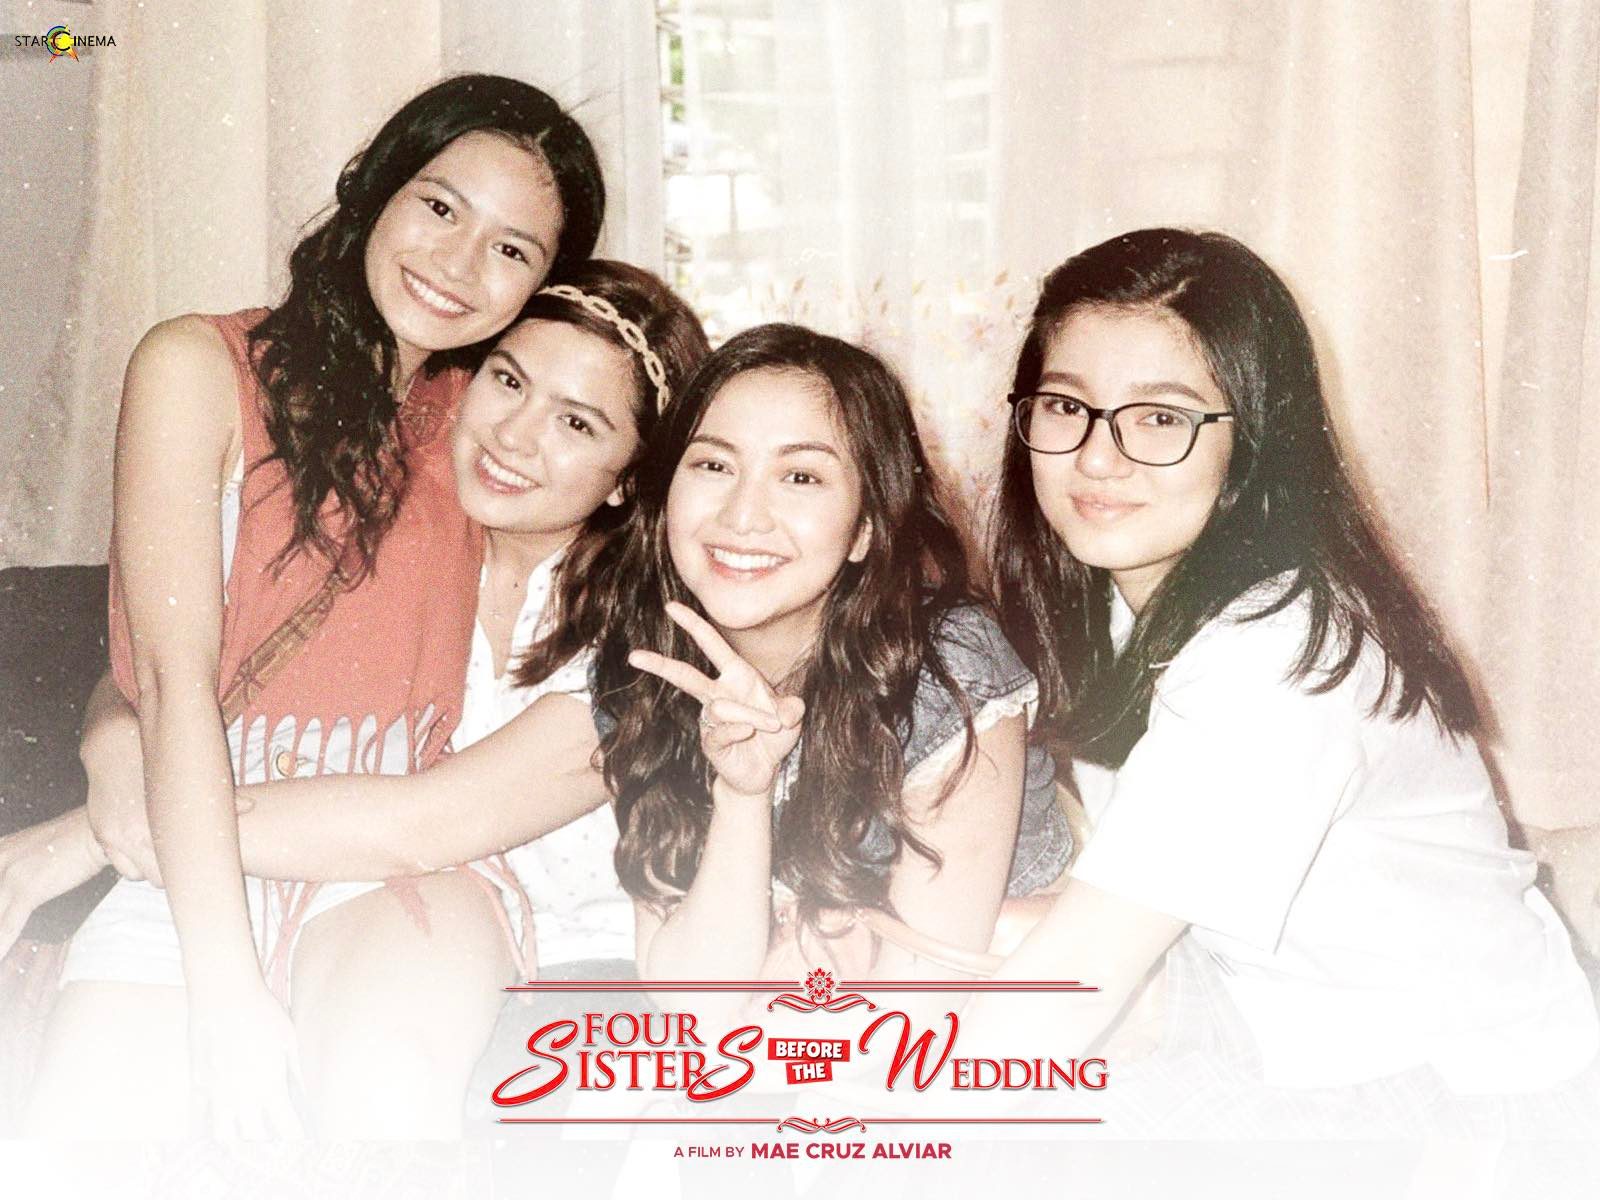 WATCH: The ‘Four Sisters Before the Wedding’ trailer is out